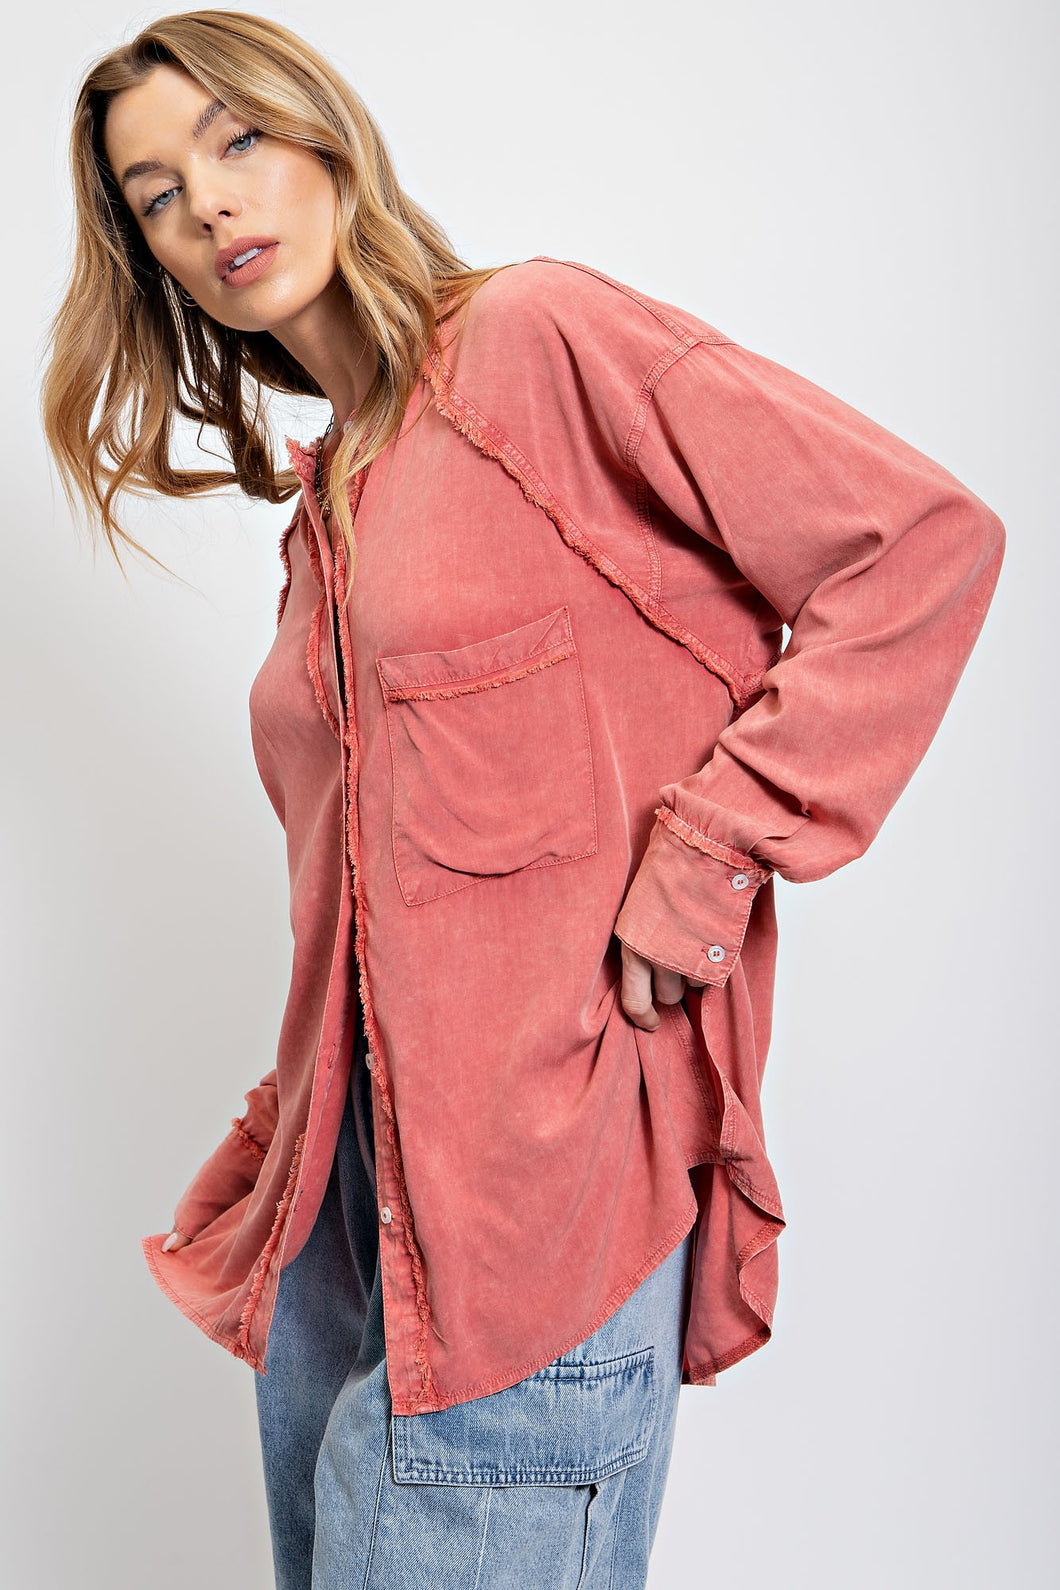 Easel Mineral Washed Tunic Shirt in Strawberry Shirts & Tops Easel   